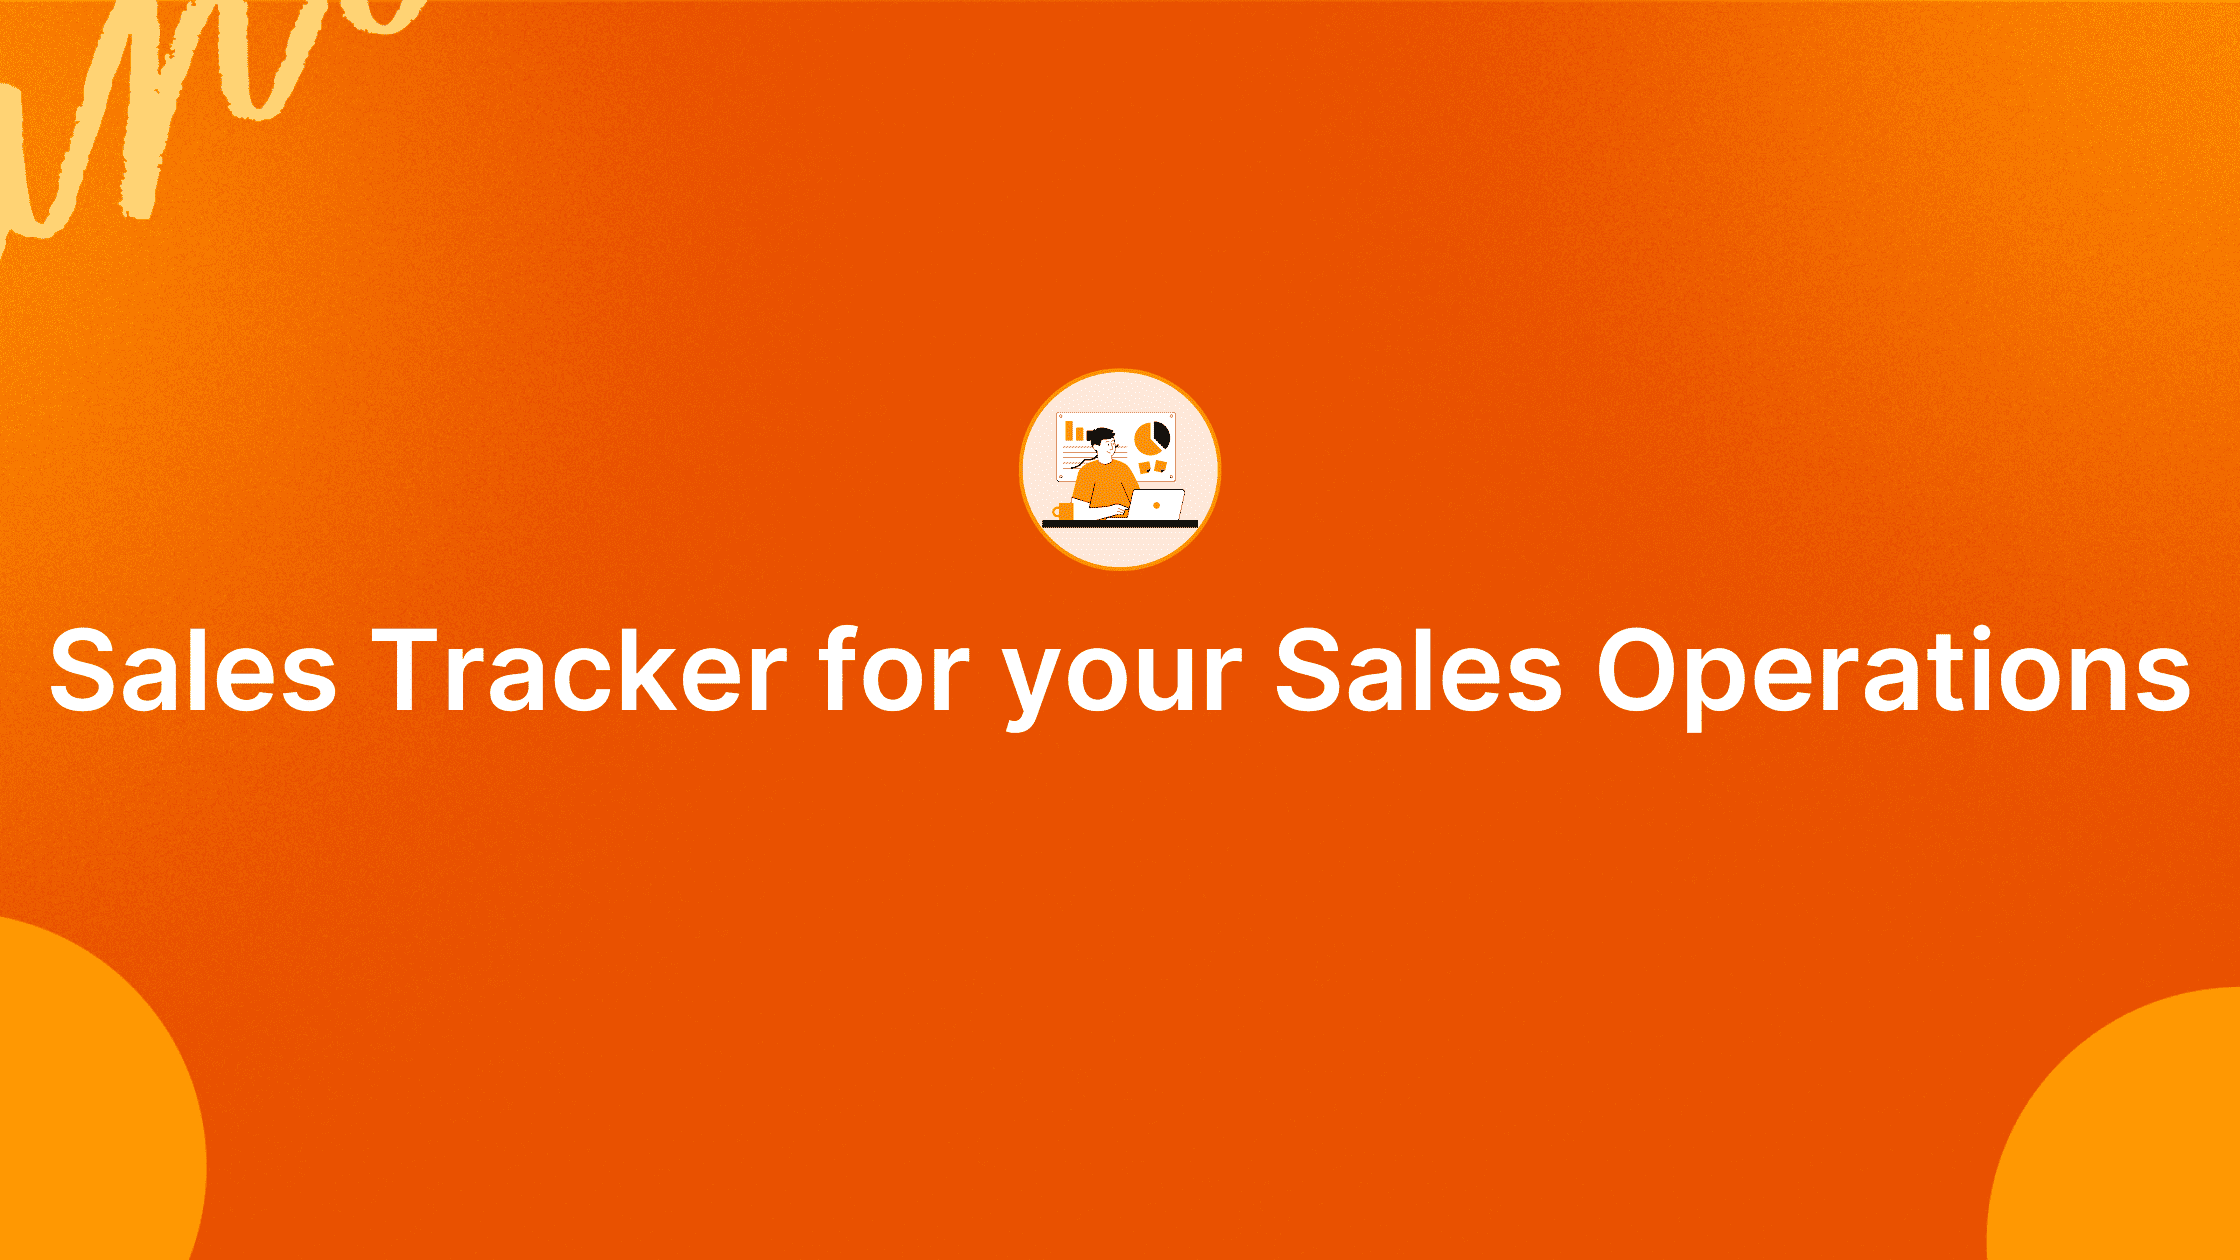 Why a Sales Tracker Is Essential to Your Sales Operations